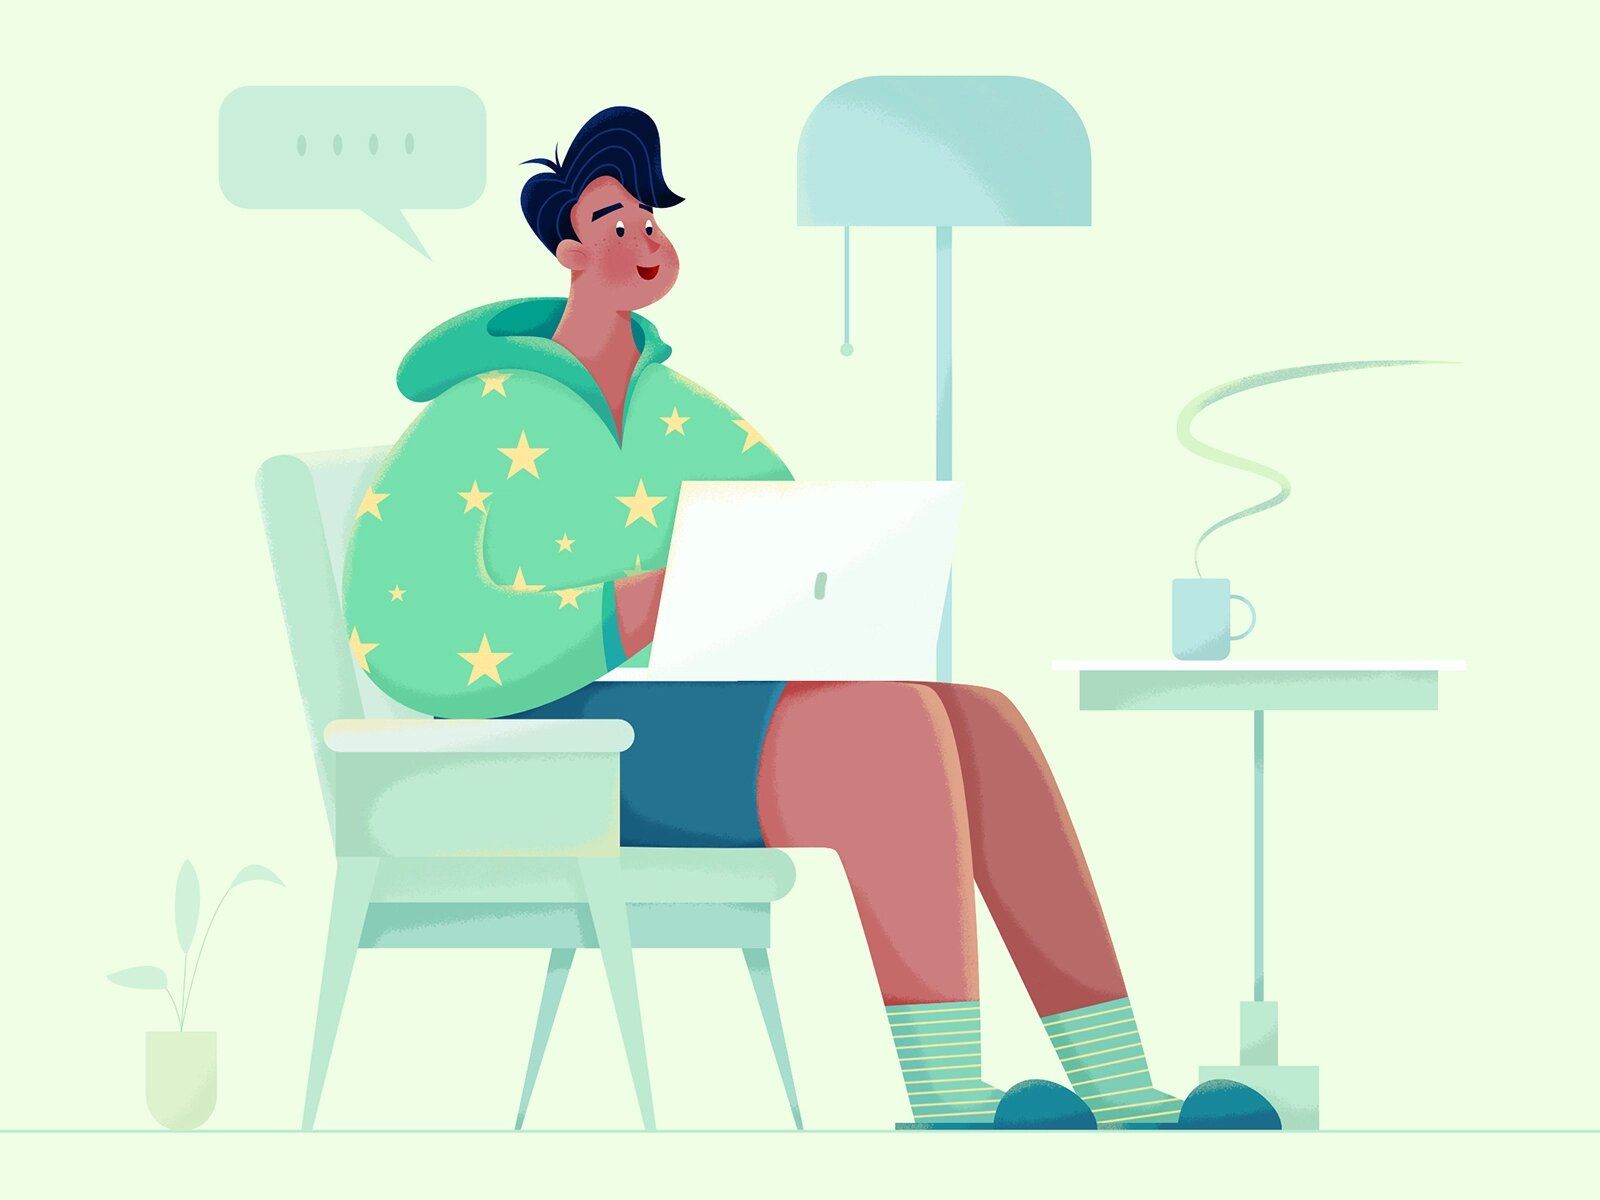 Freelance app developers are a great option for those who don’t have strict time limits (*image by [Uran Duo](https://dribbble.com/urancd){ rel="nofollow" target="_blank" .default-md}*)